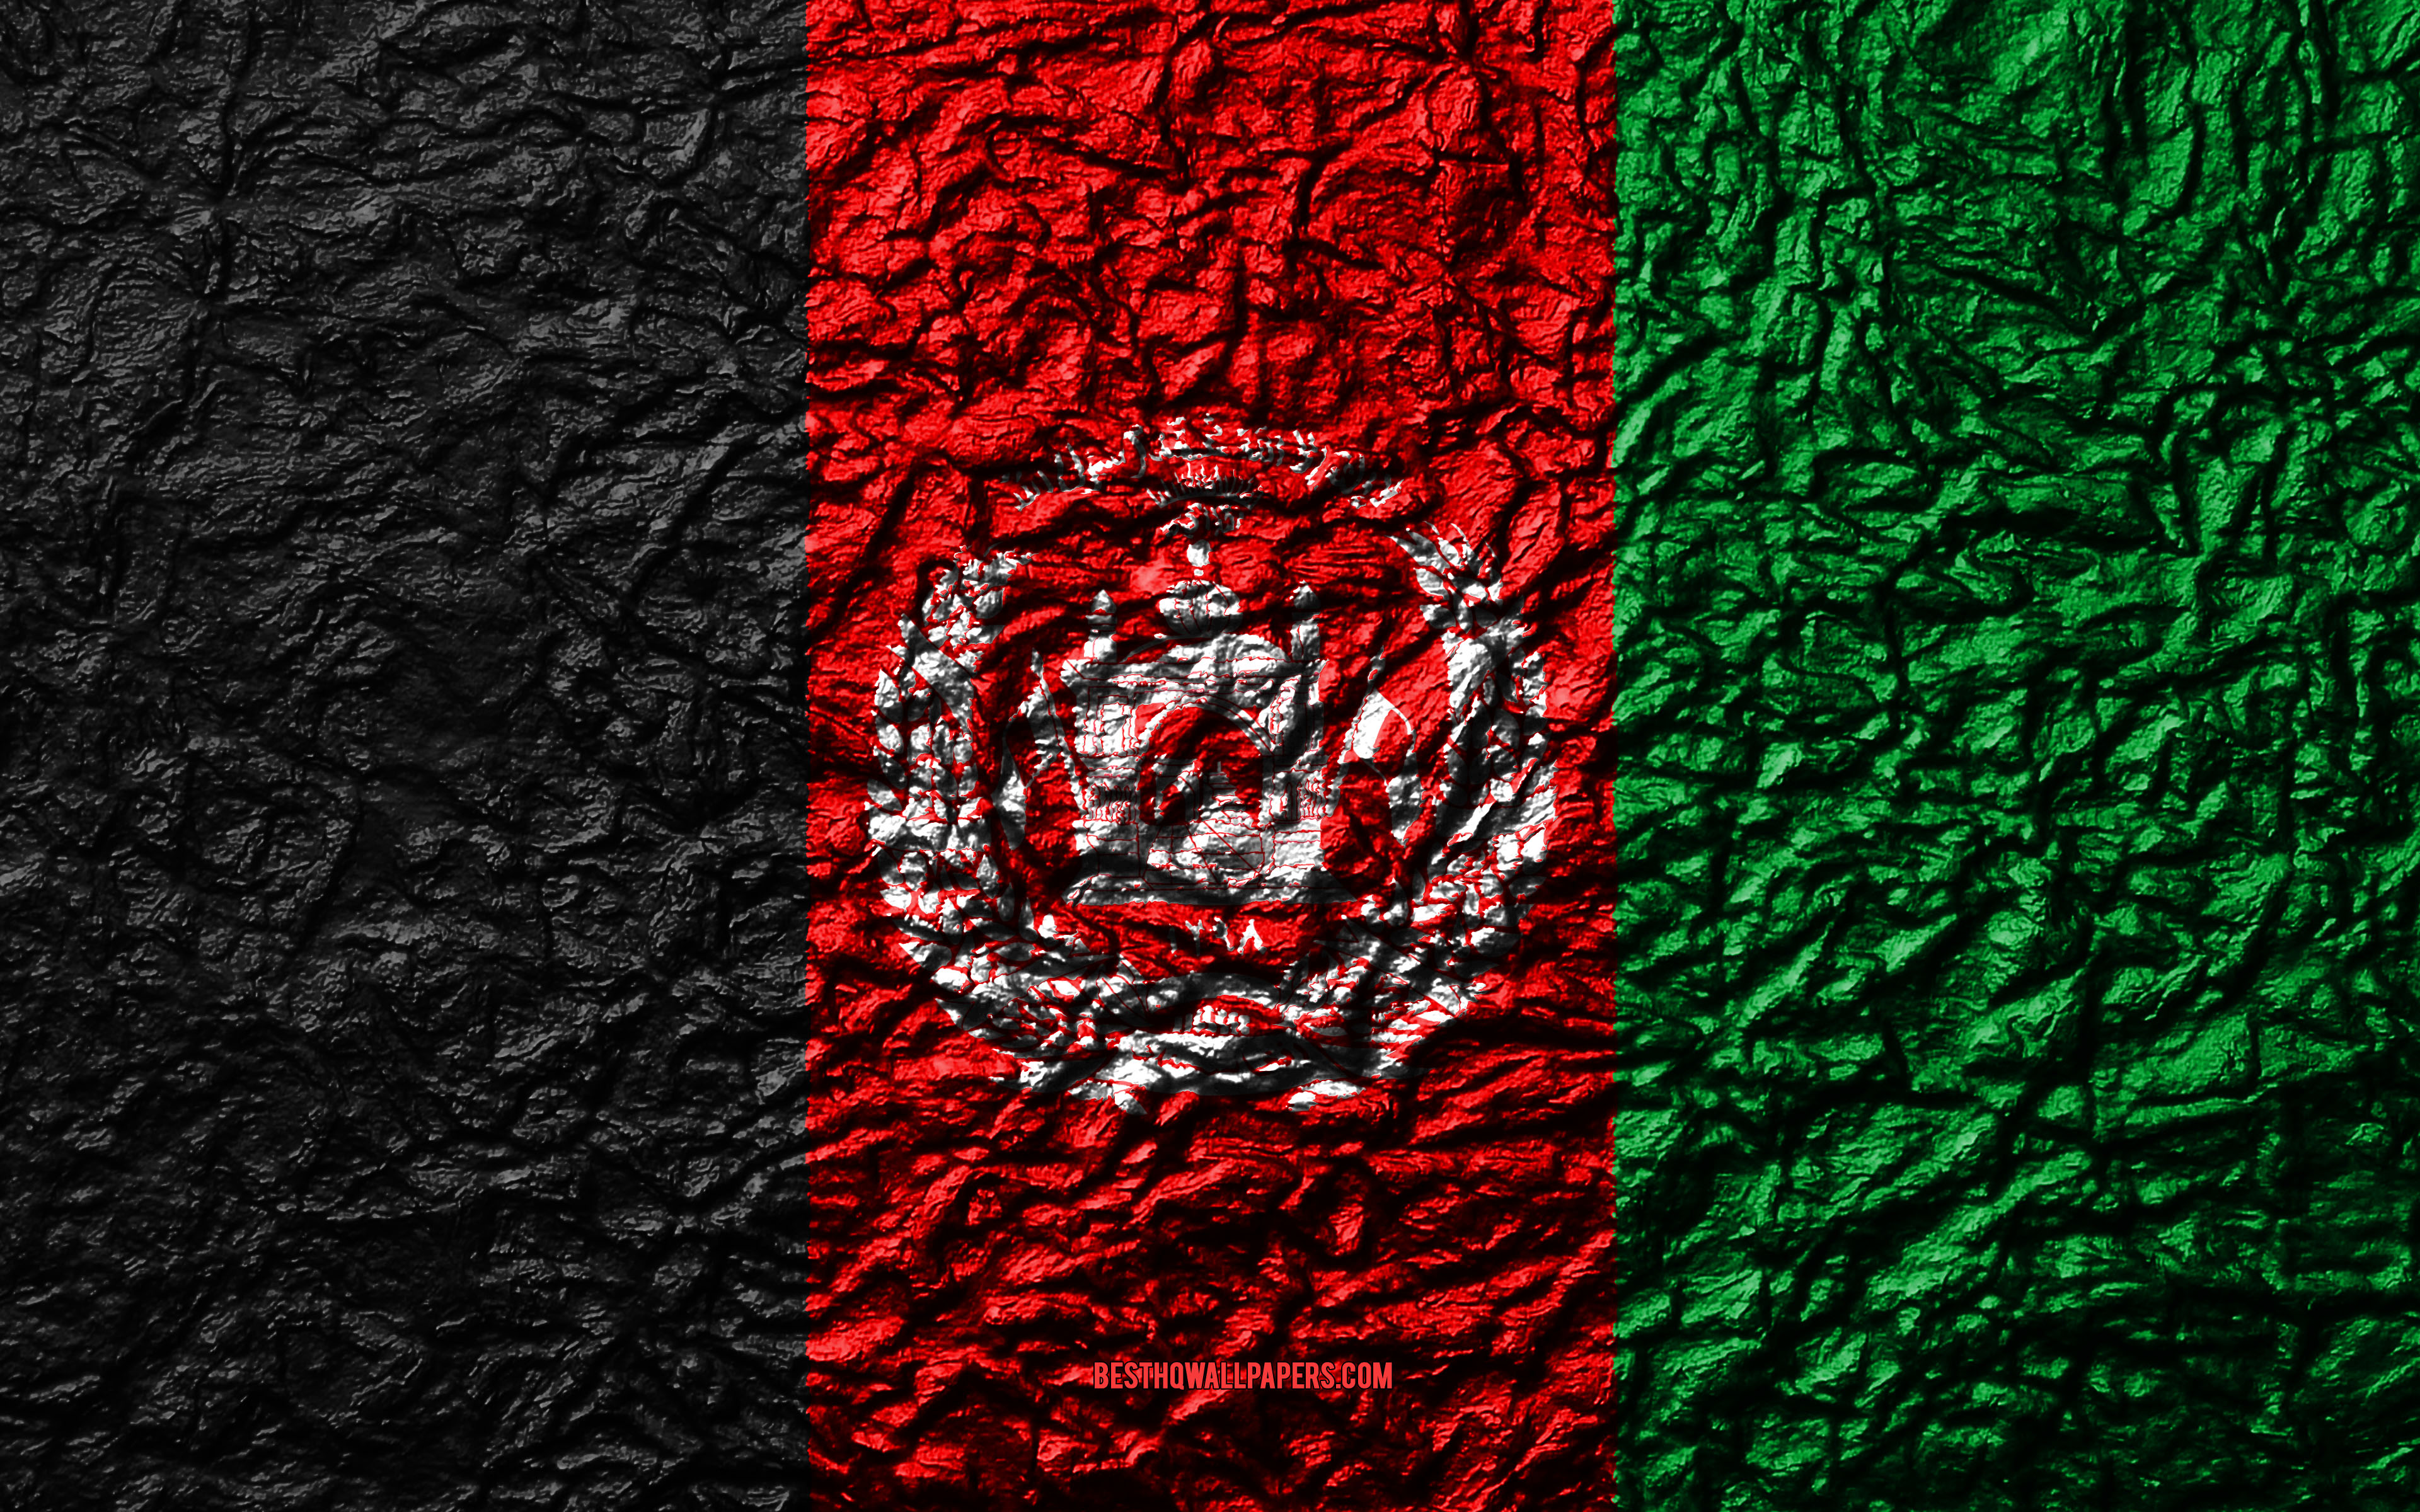 Download wallpaper Flag of Afghanistan, 4k, stone texture, waves texture, Afghanistan flag, national symbol, Afghanistan, Asia, stone background for desktop with resolution 3840x2400. High Quality HD picture wallpaper